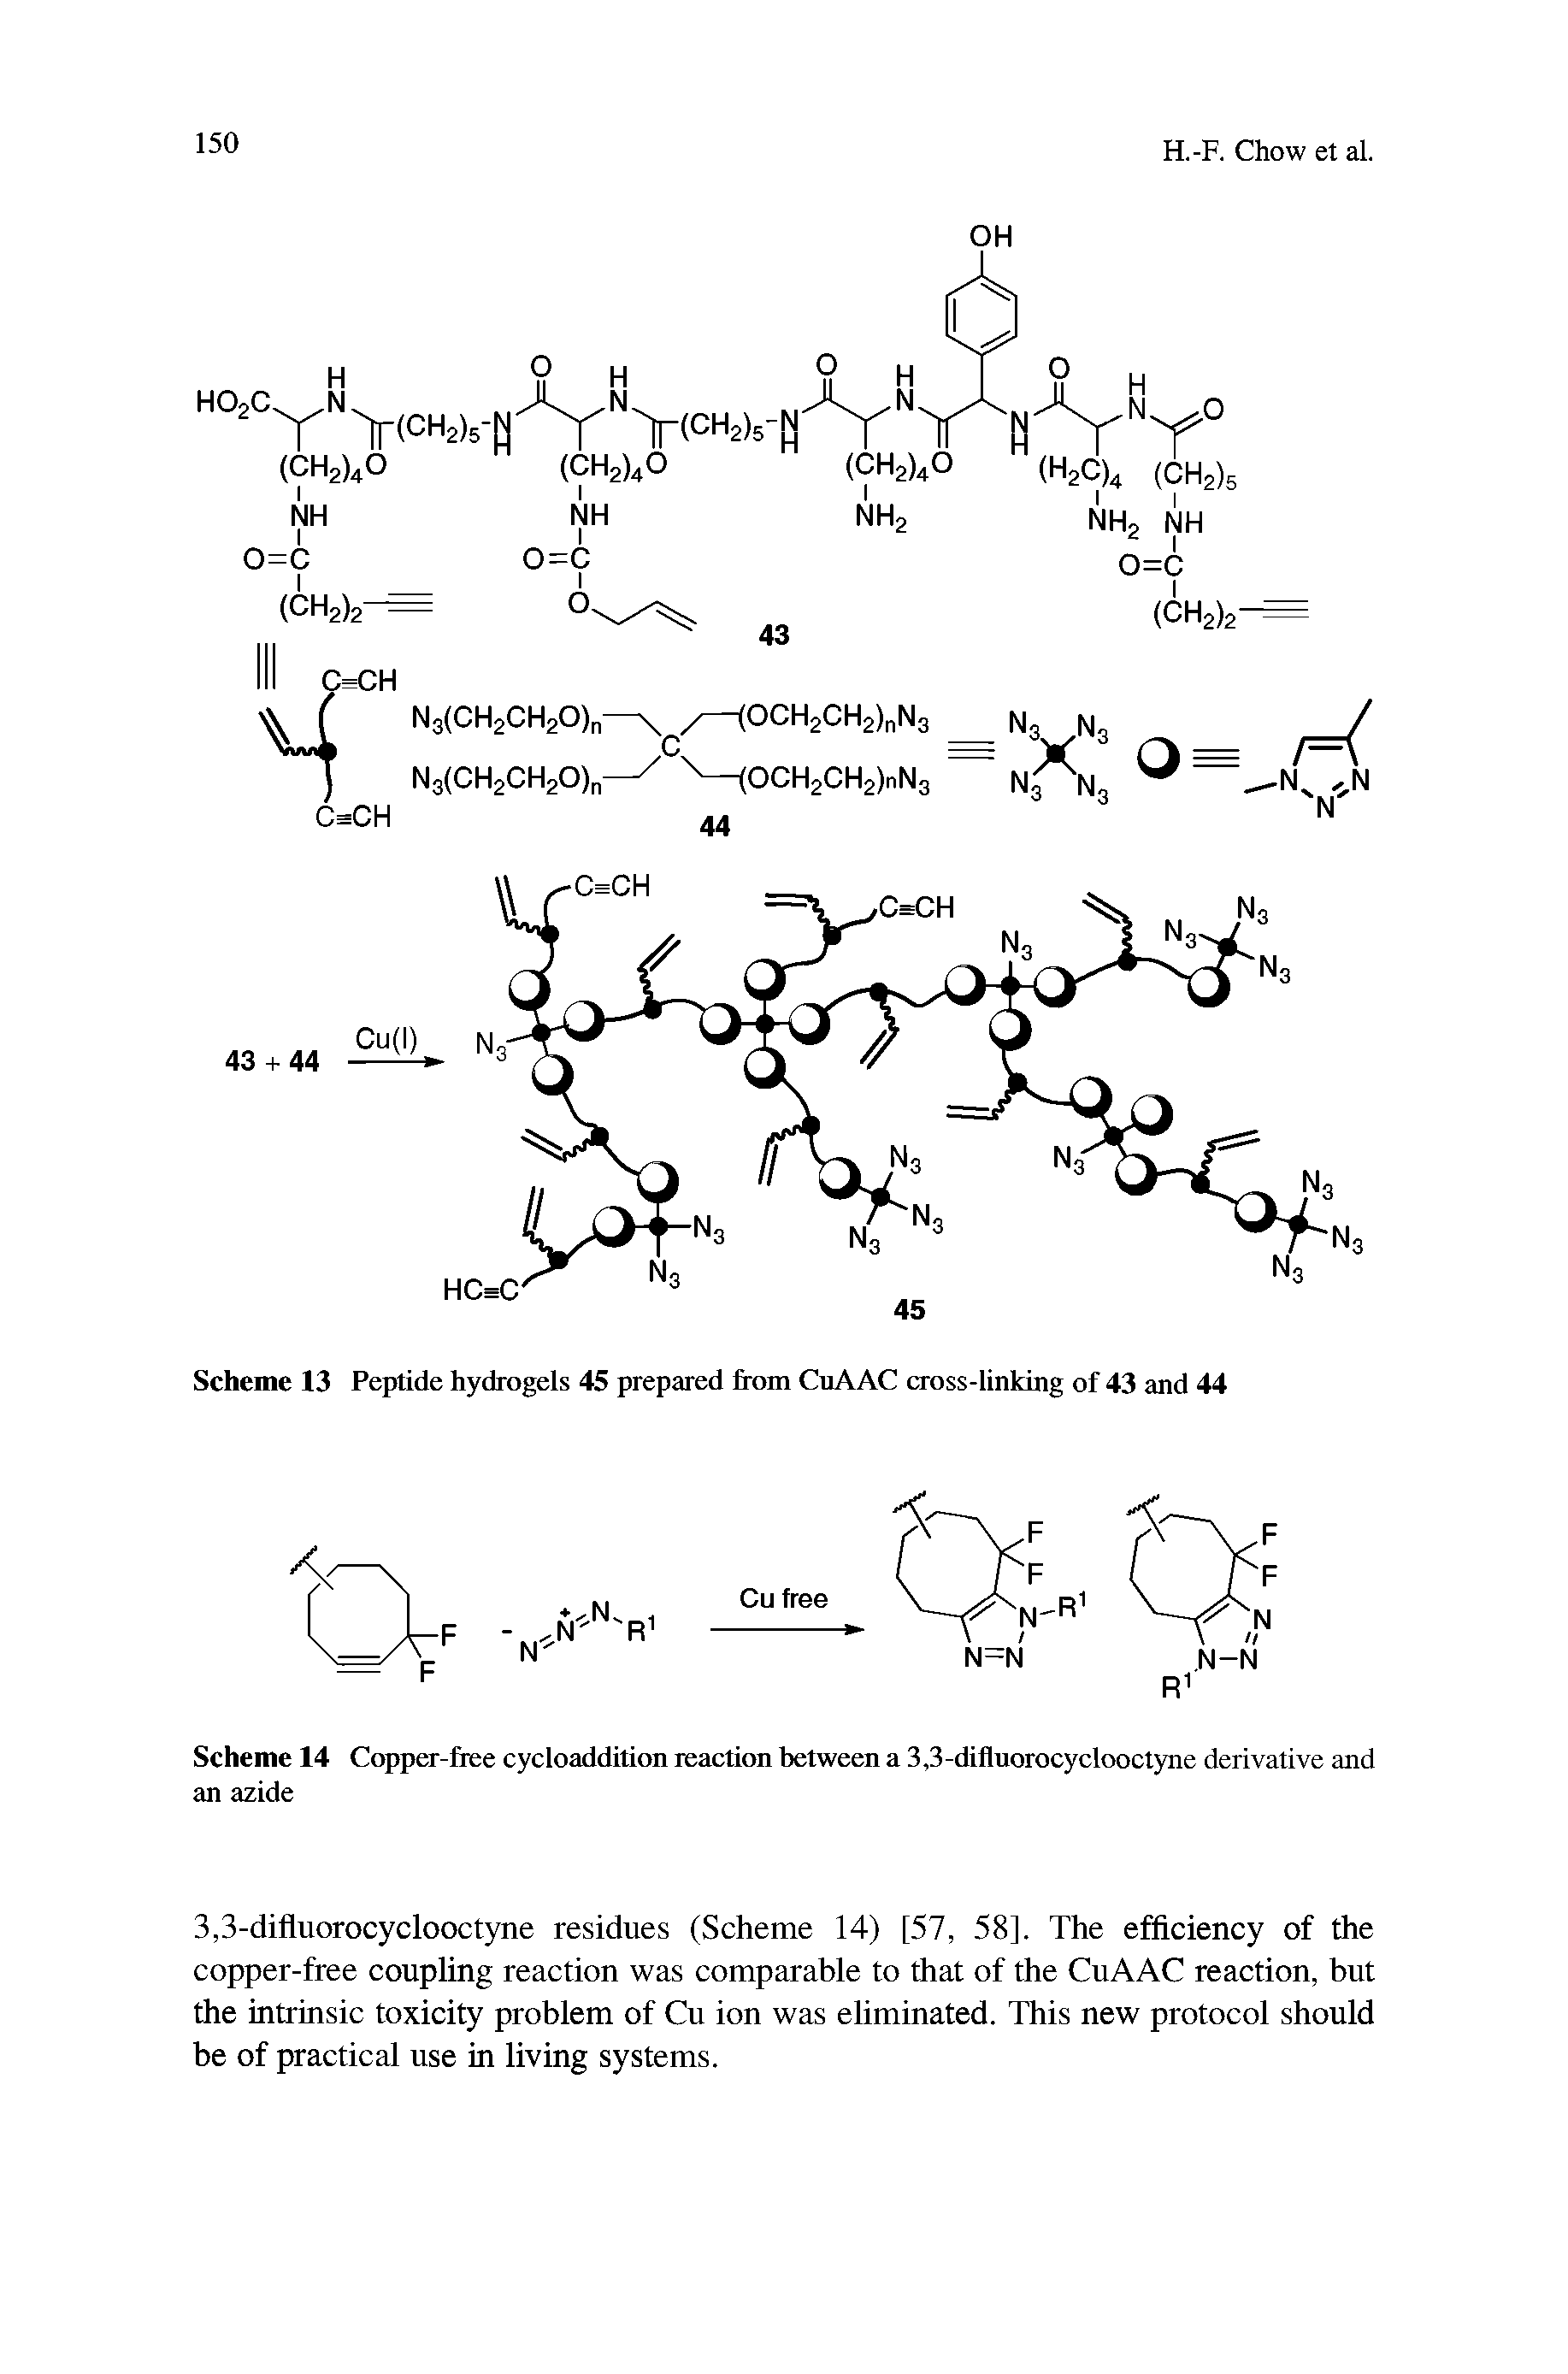 Scheme 14 Copper-free cycloaddition reaction between a 3,3-difluorocyclooctyne derivative and an azide...